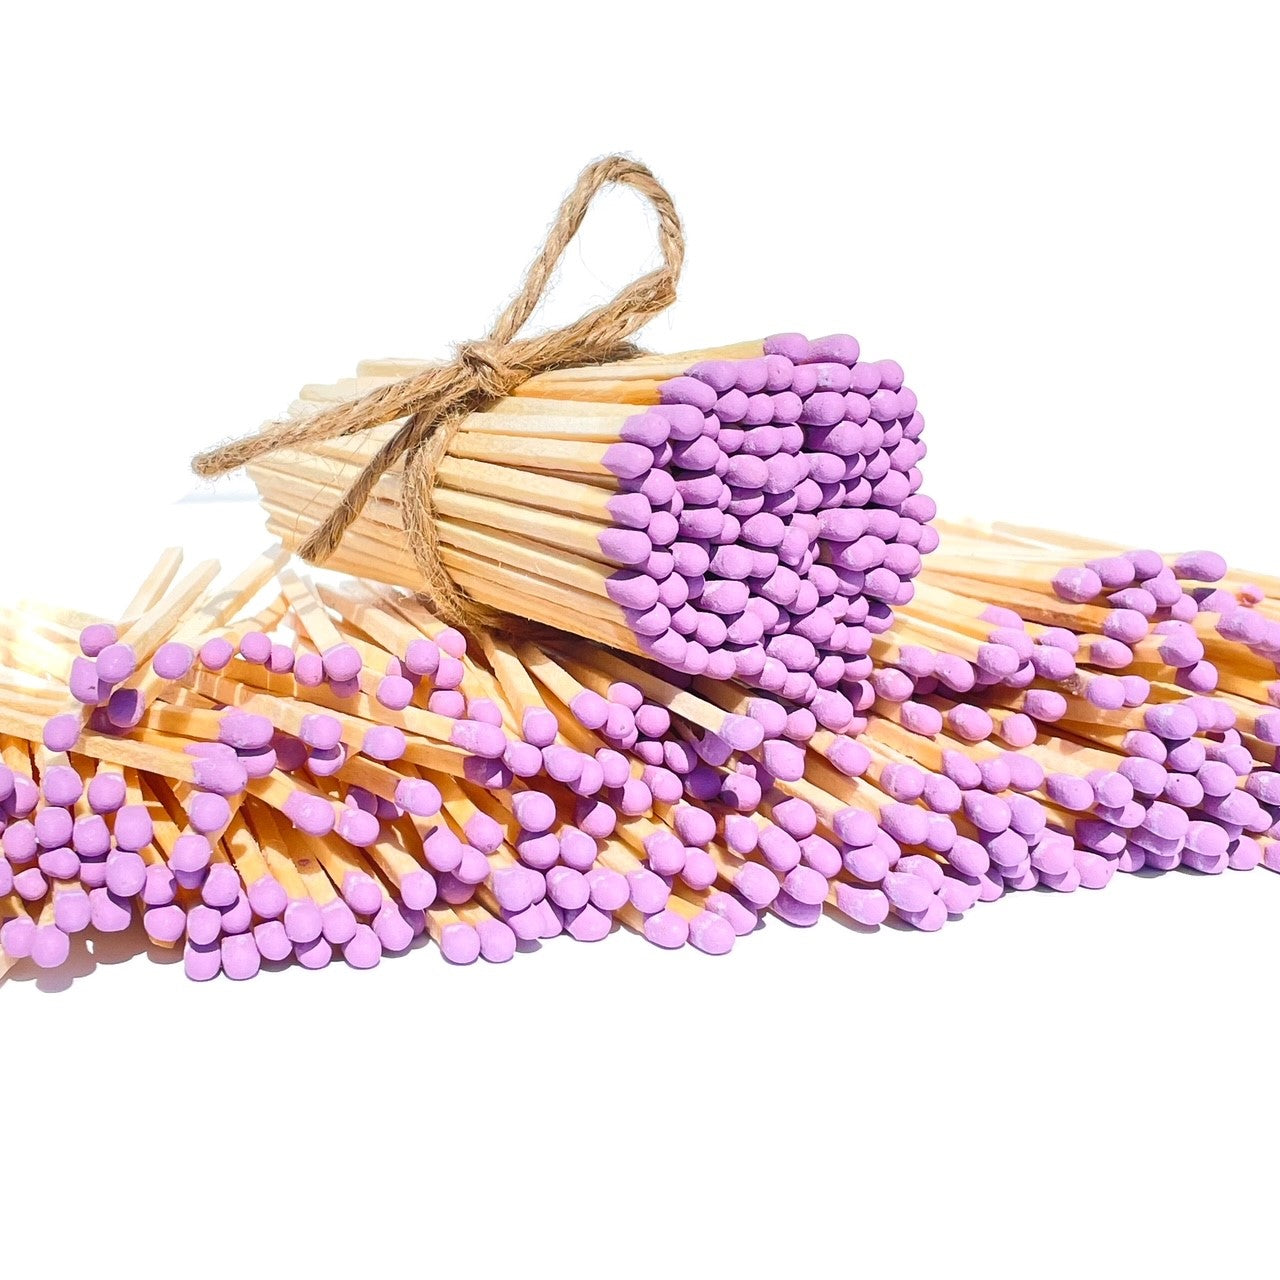 Bulk 3.75 Matches QTY: 100 to 15,000 Colored Matches Candle Matches Long  Matches Wooden Matches Safety Matches 